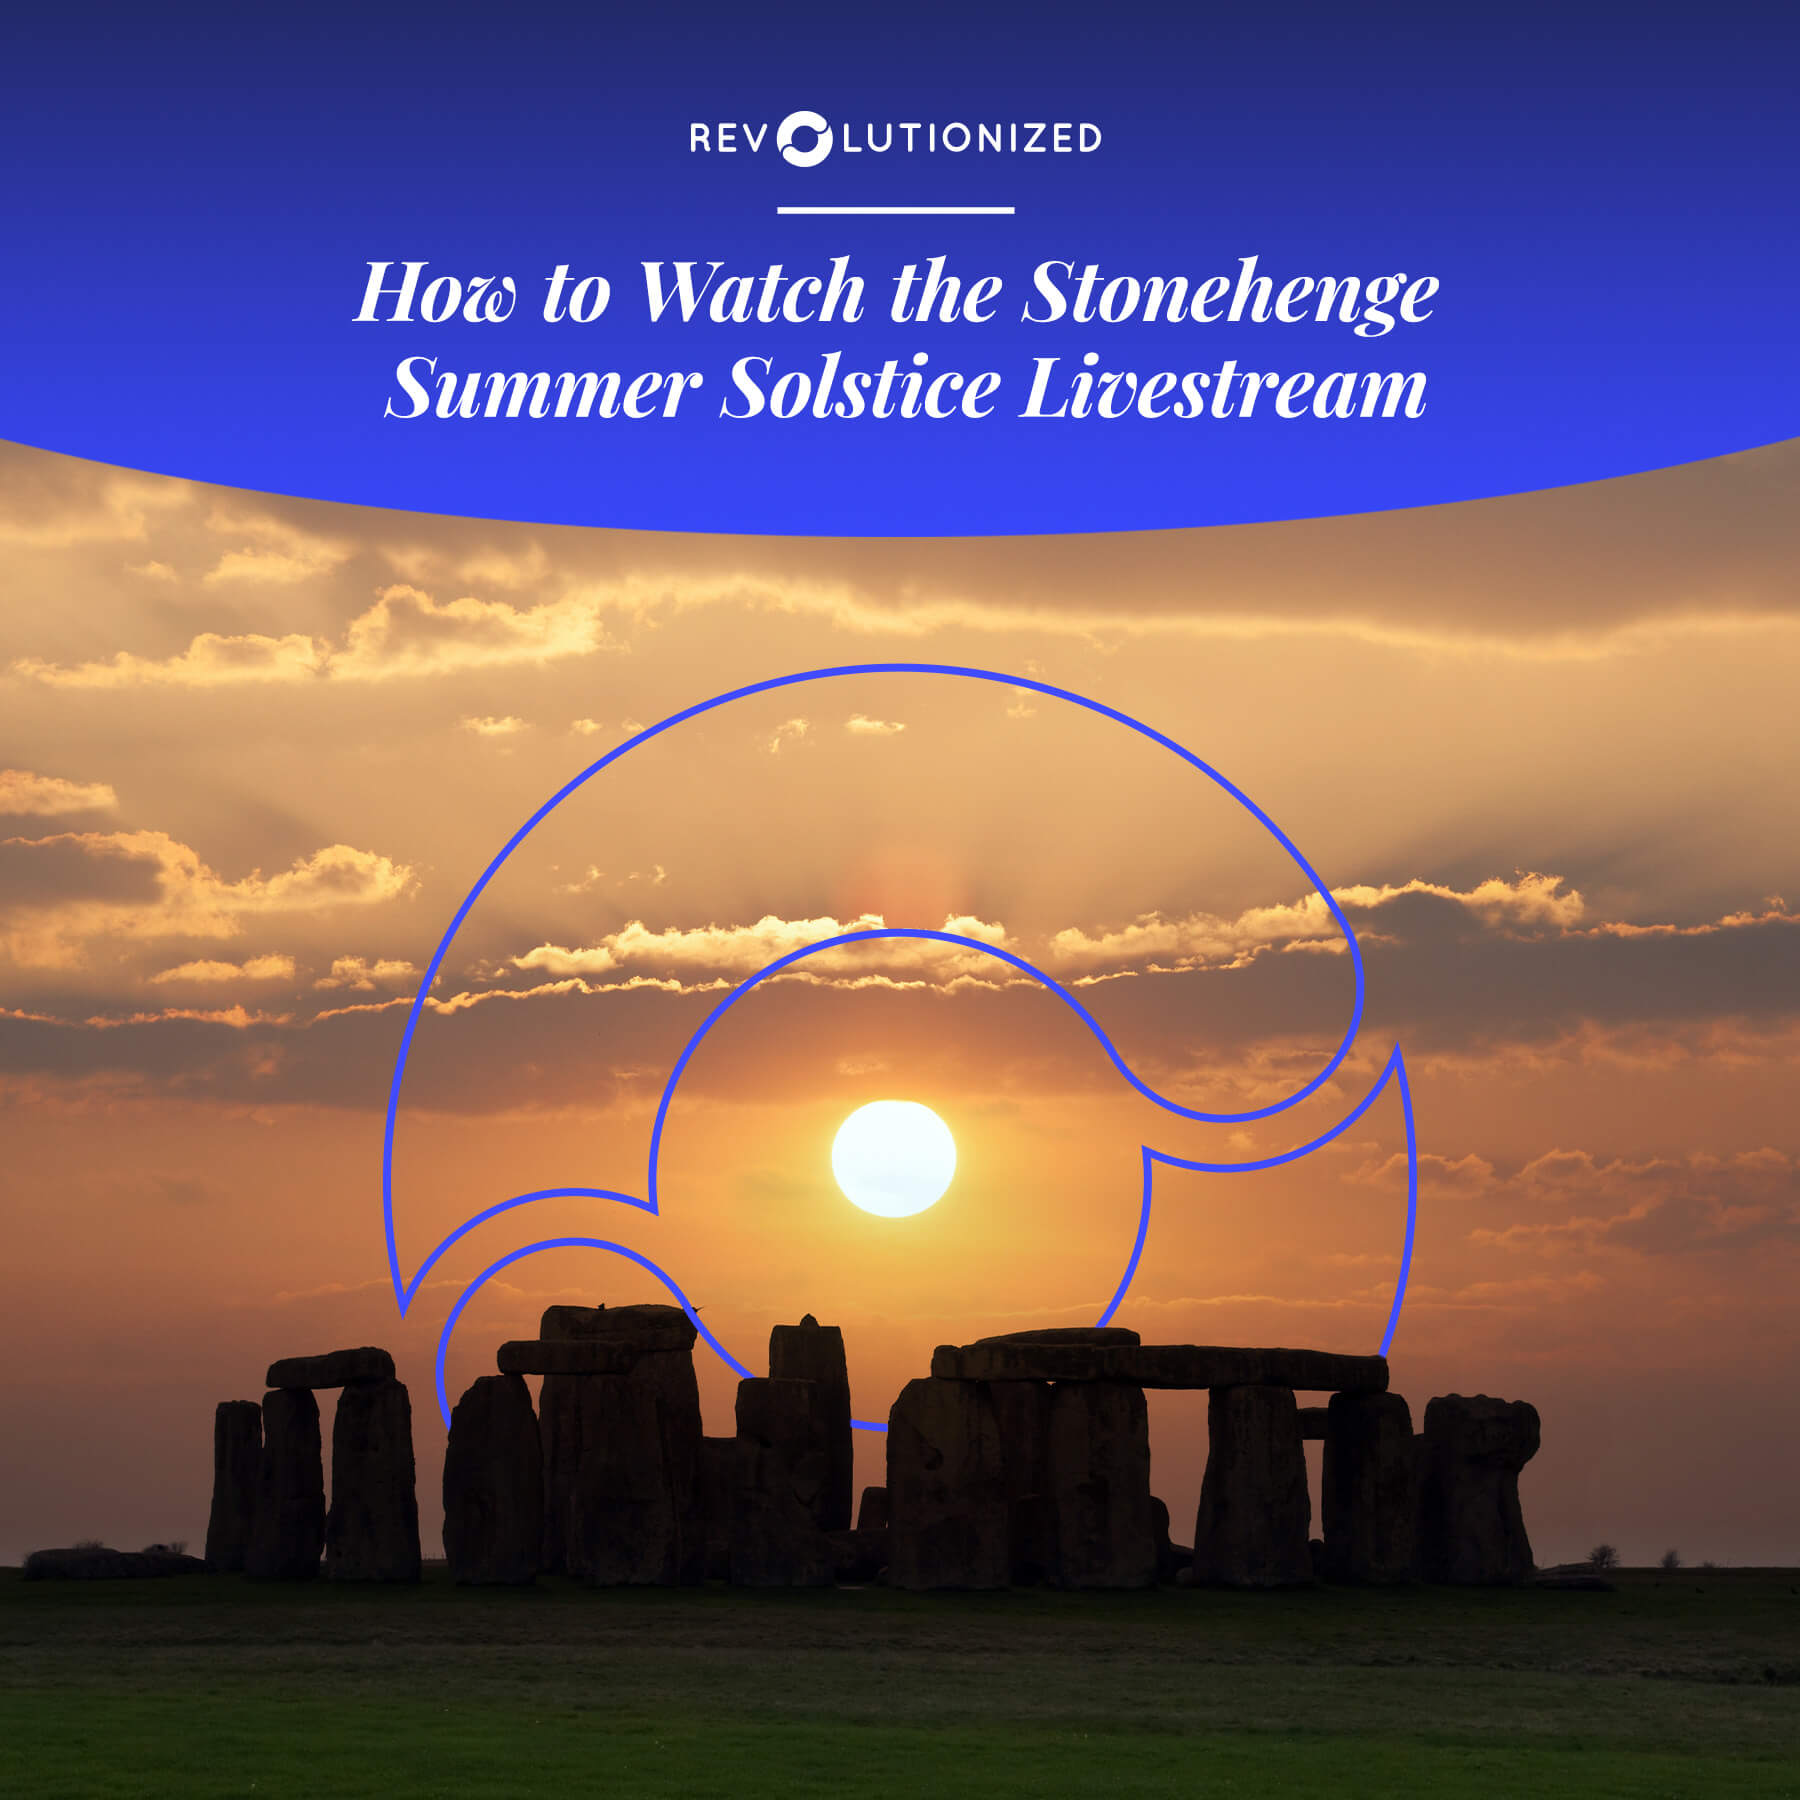 How to Watch the Stonehenge Summer Solstice Livestream